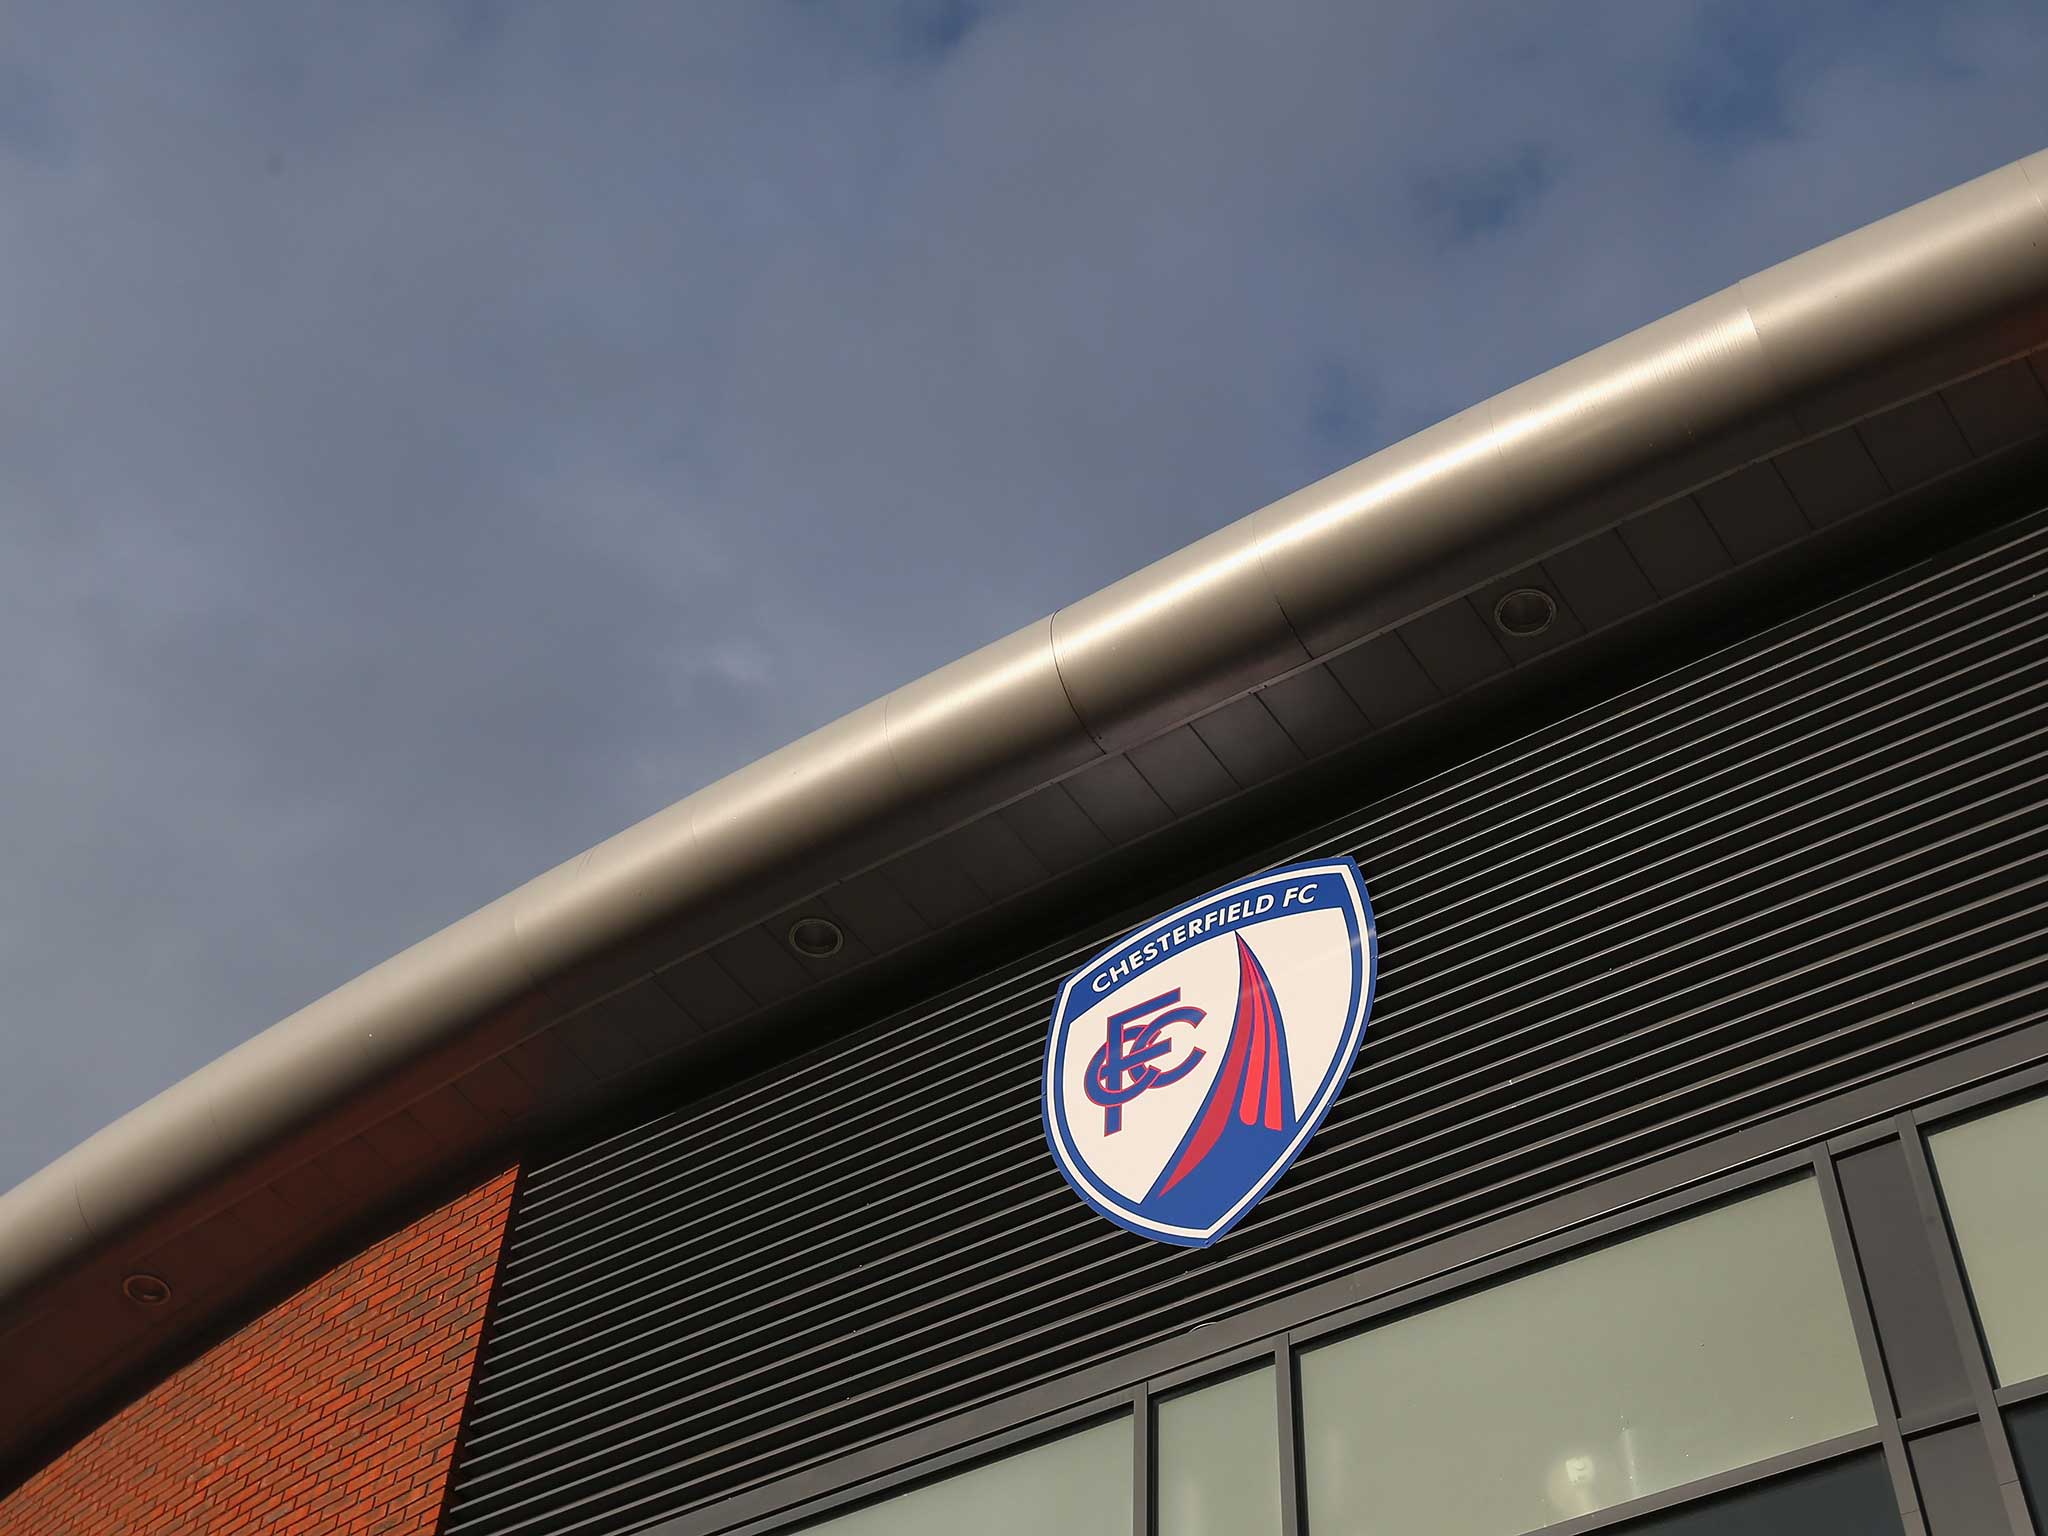 The Proact Stadium, the home of Chesterfield FC